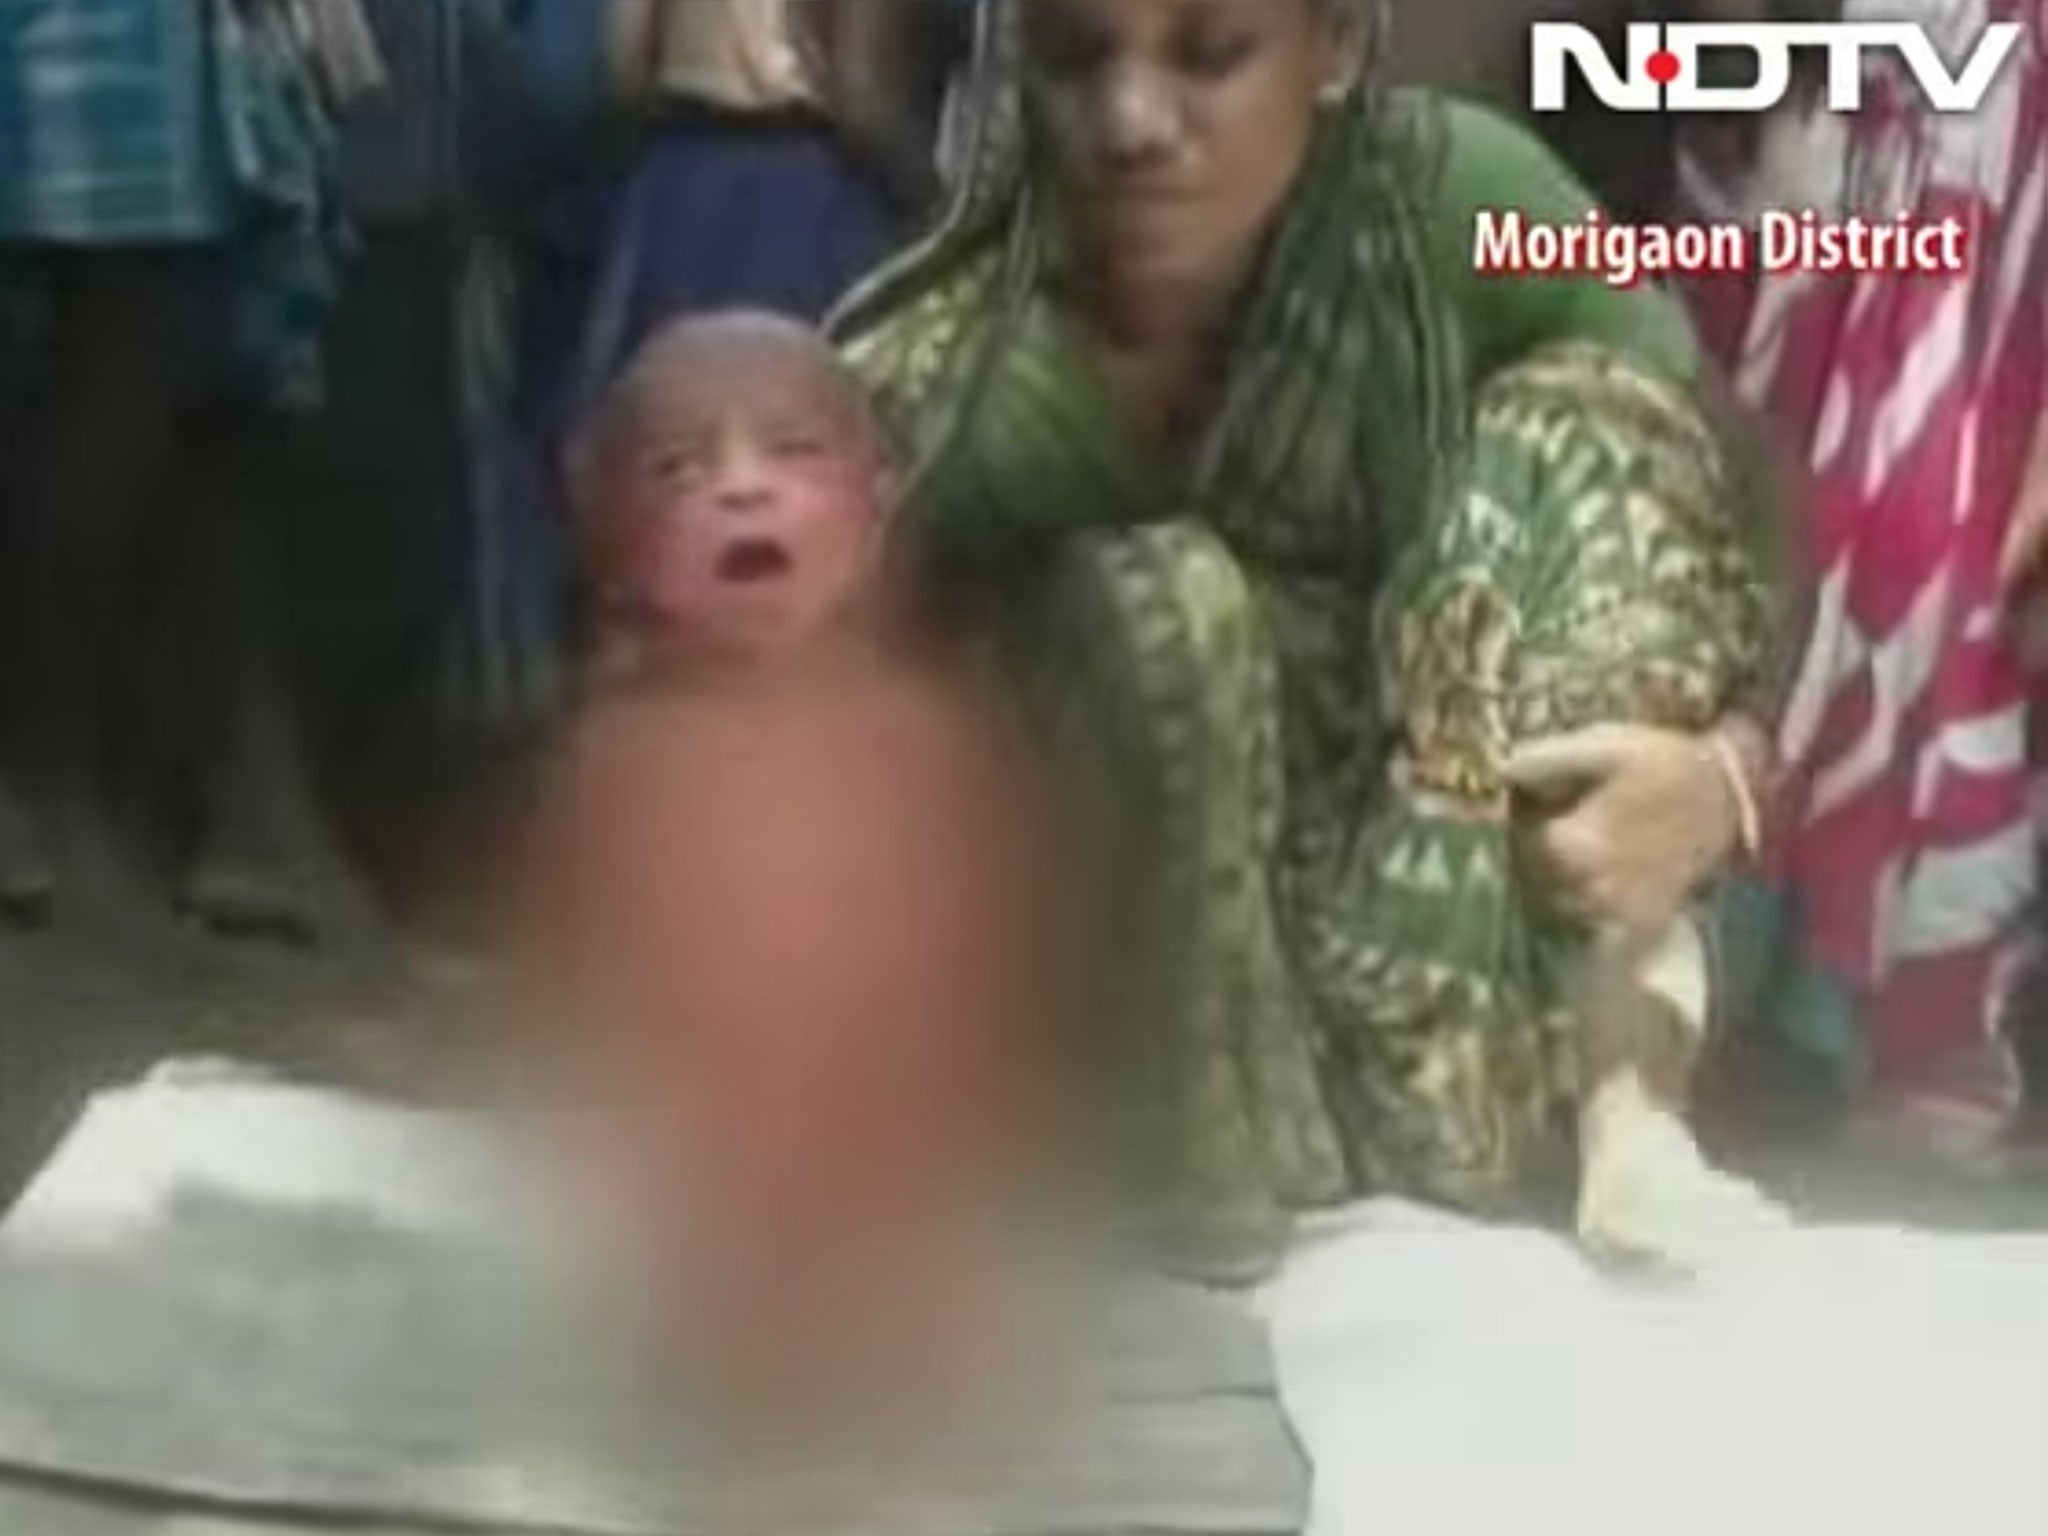 A woman forces a new born baby to walk